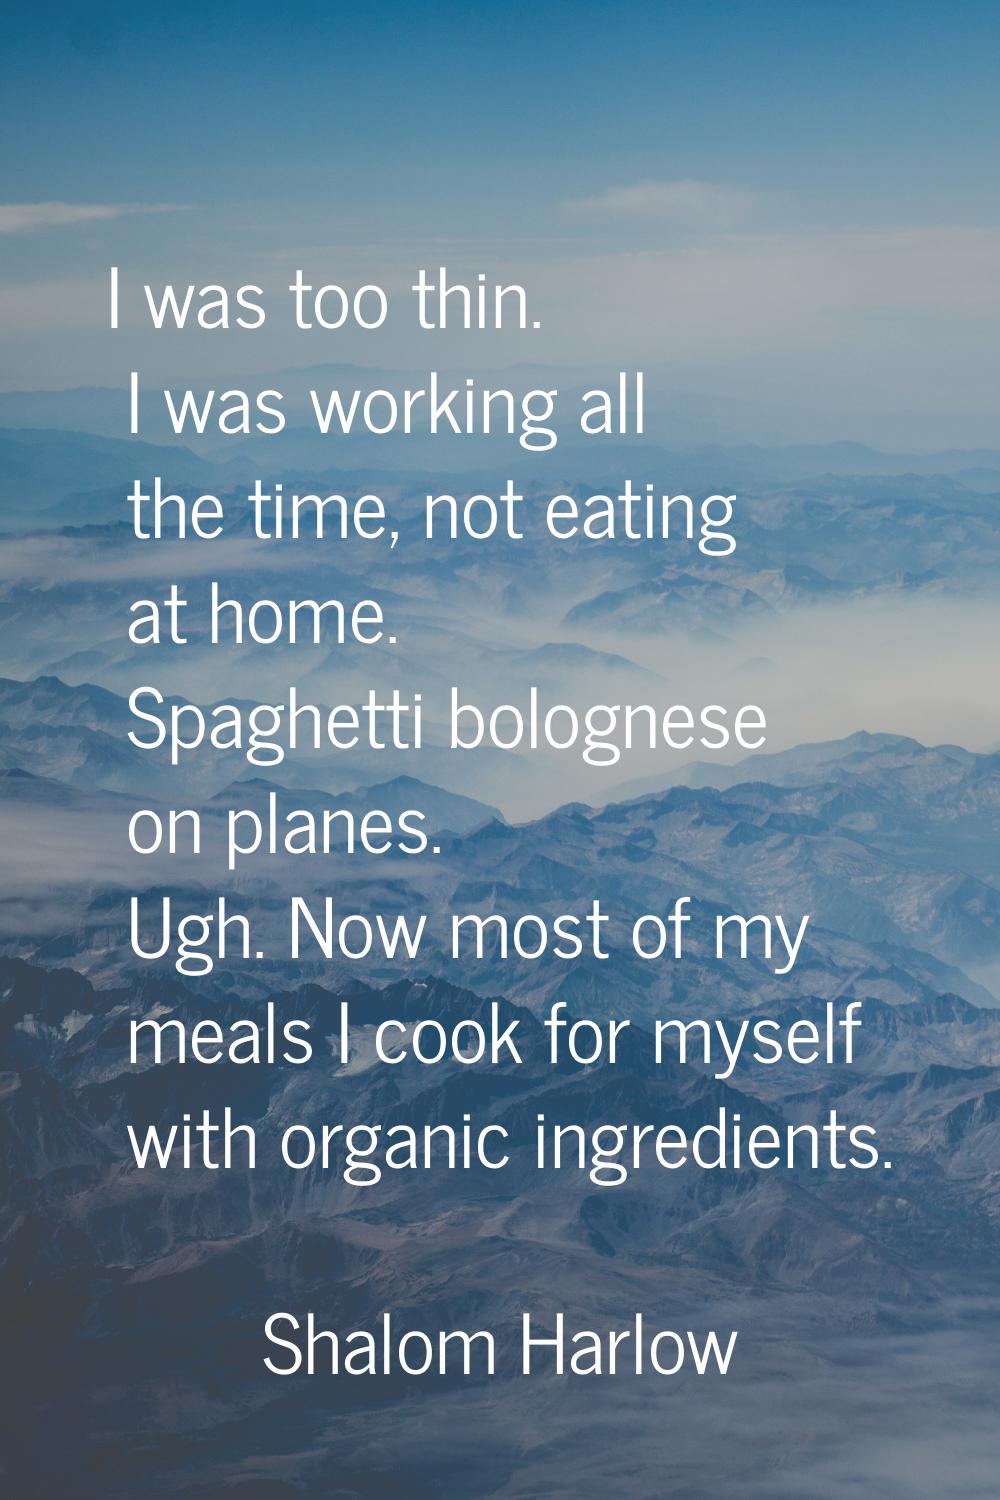 I was too thin. I was working all the time, not eating at home. Spaghetti bolognese on planes. Ugh.